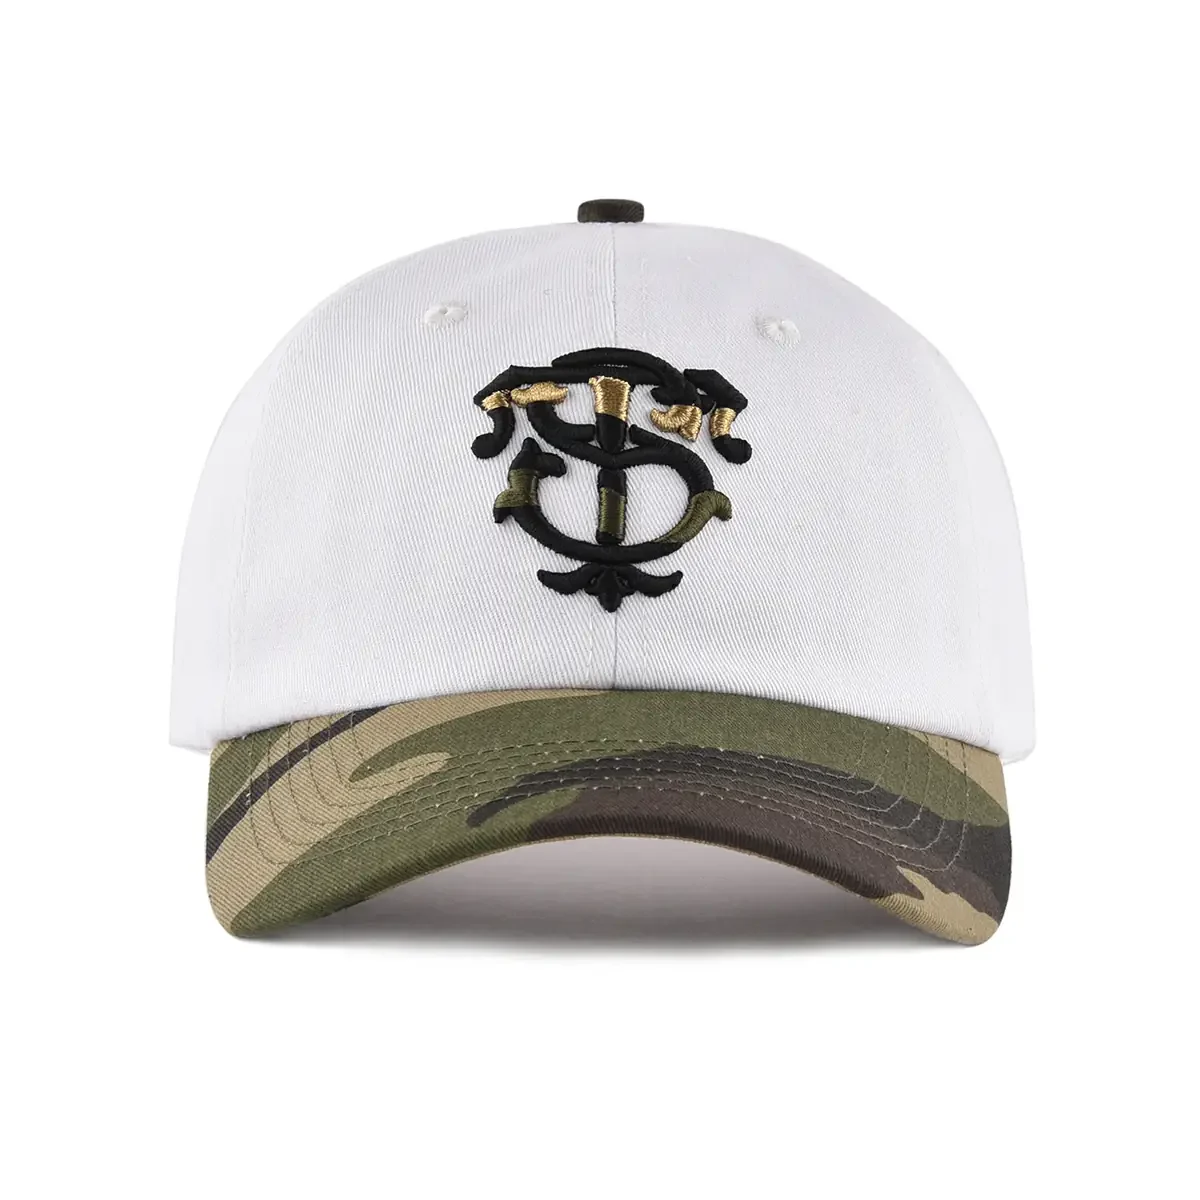 the-front-side-of-the-twill-baseball-cap-KN2012301-1